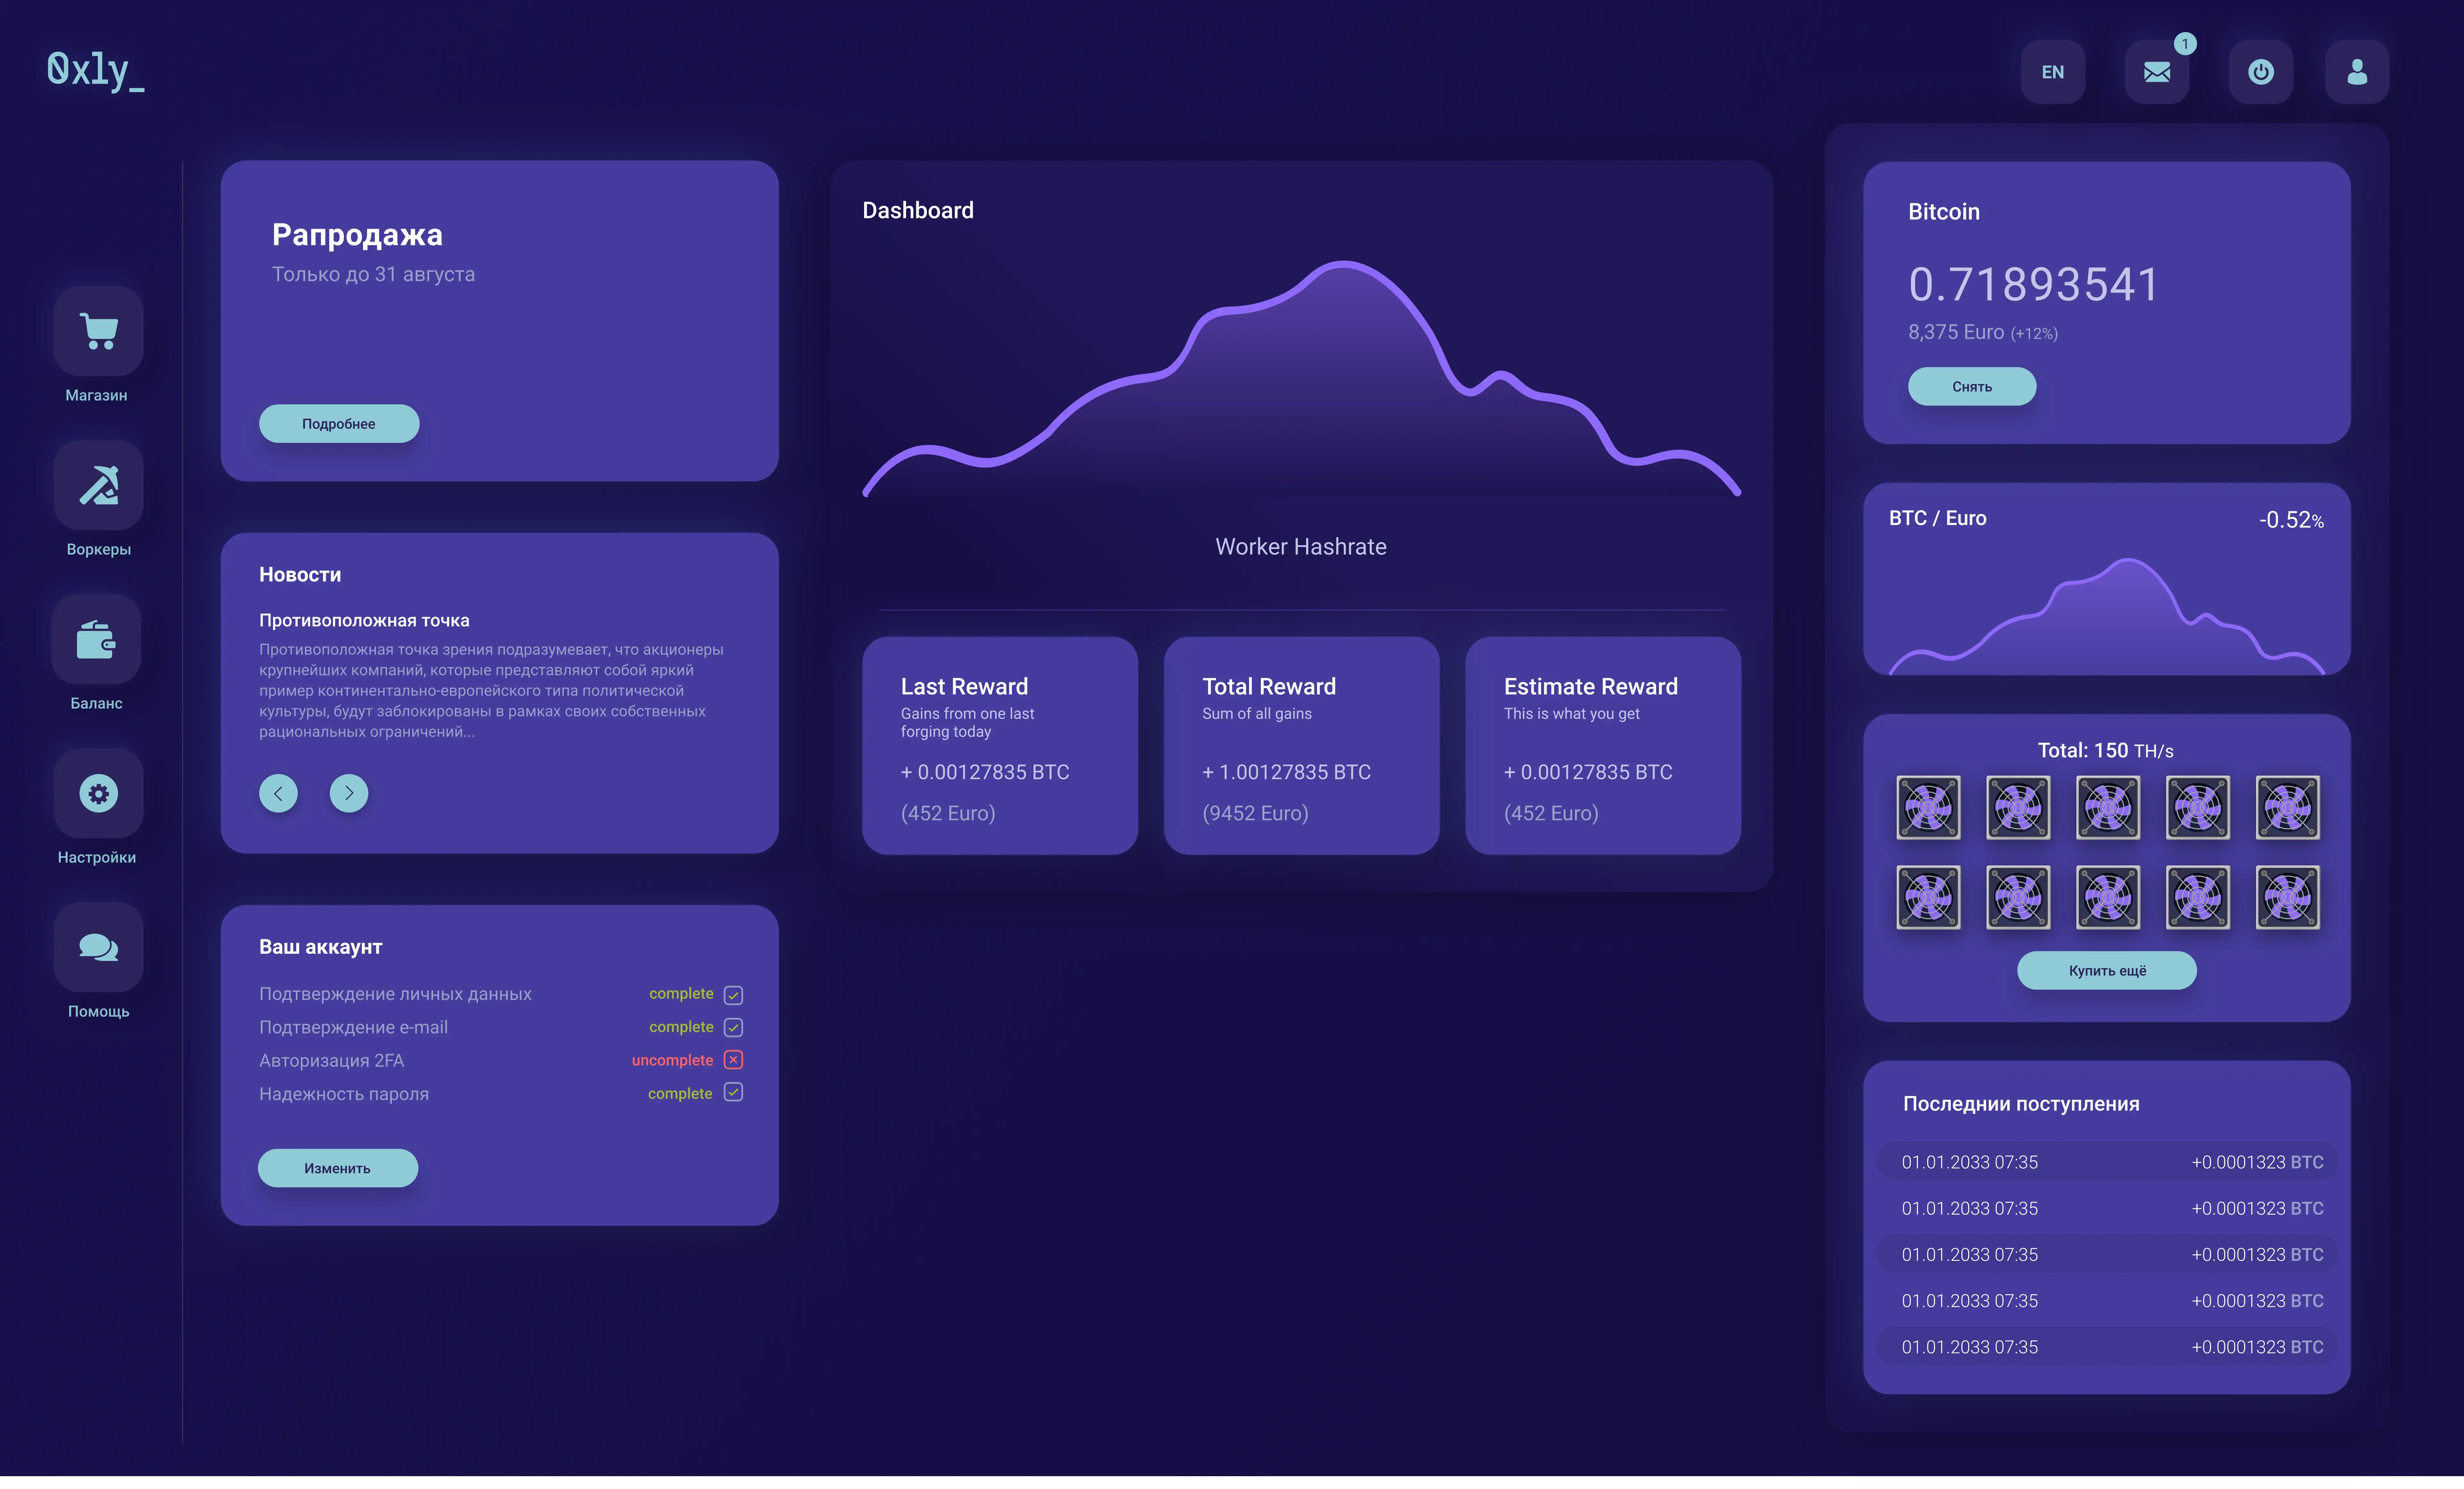 Oxly dashboard